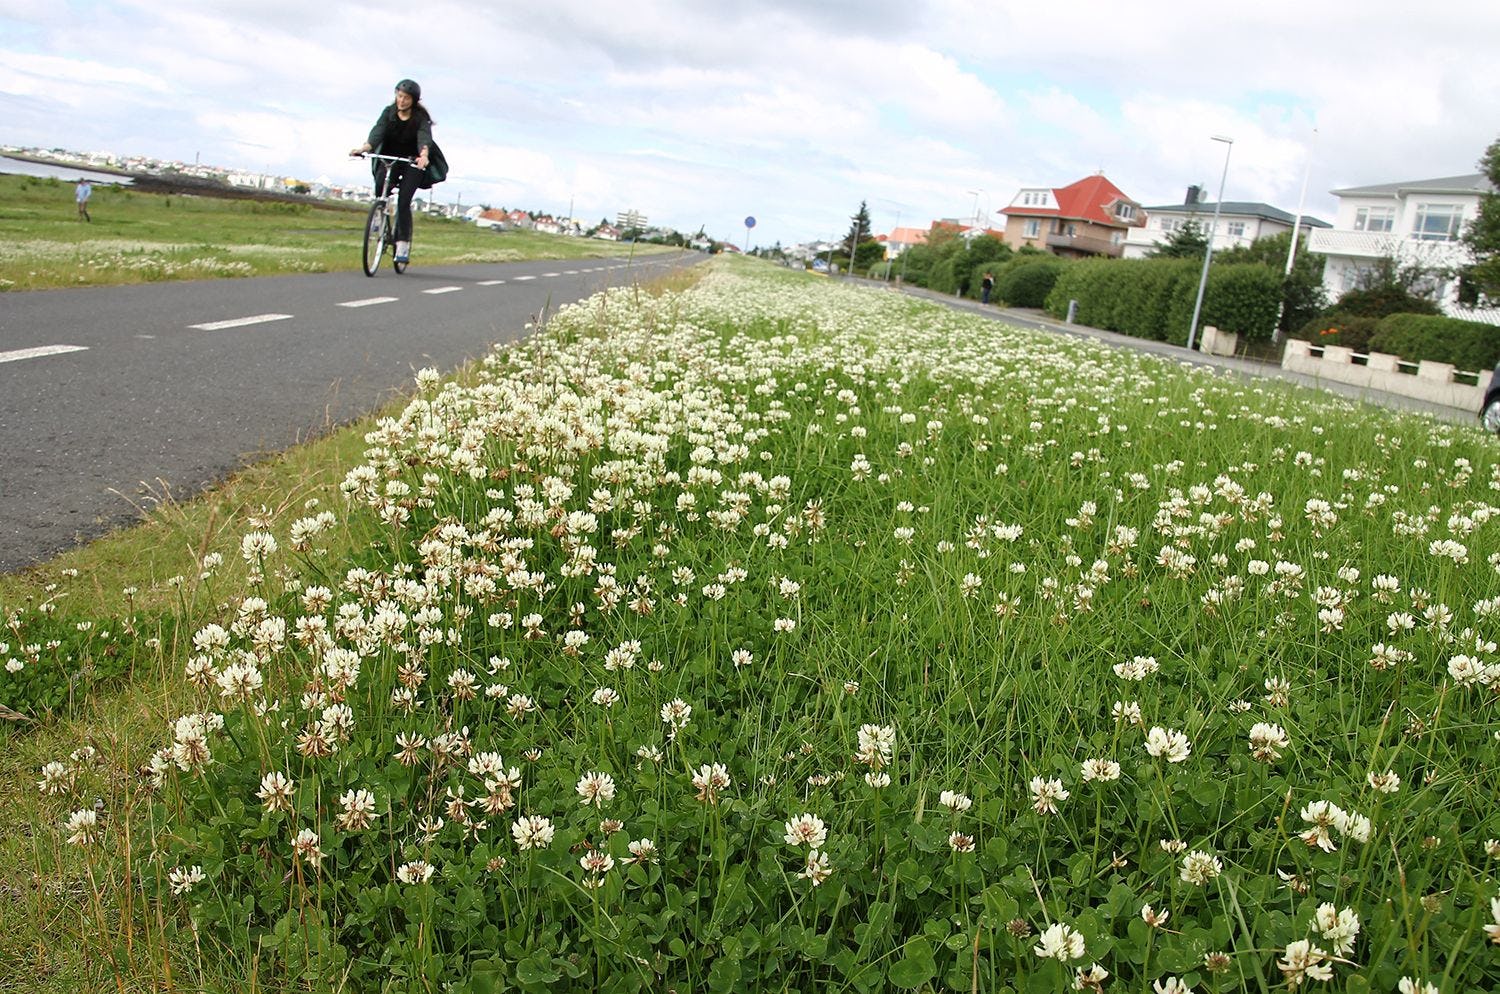 A person biking next to a field of blooming white flowers